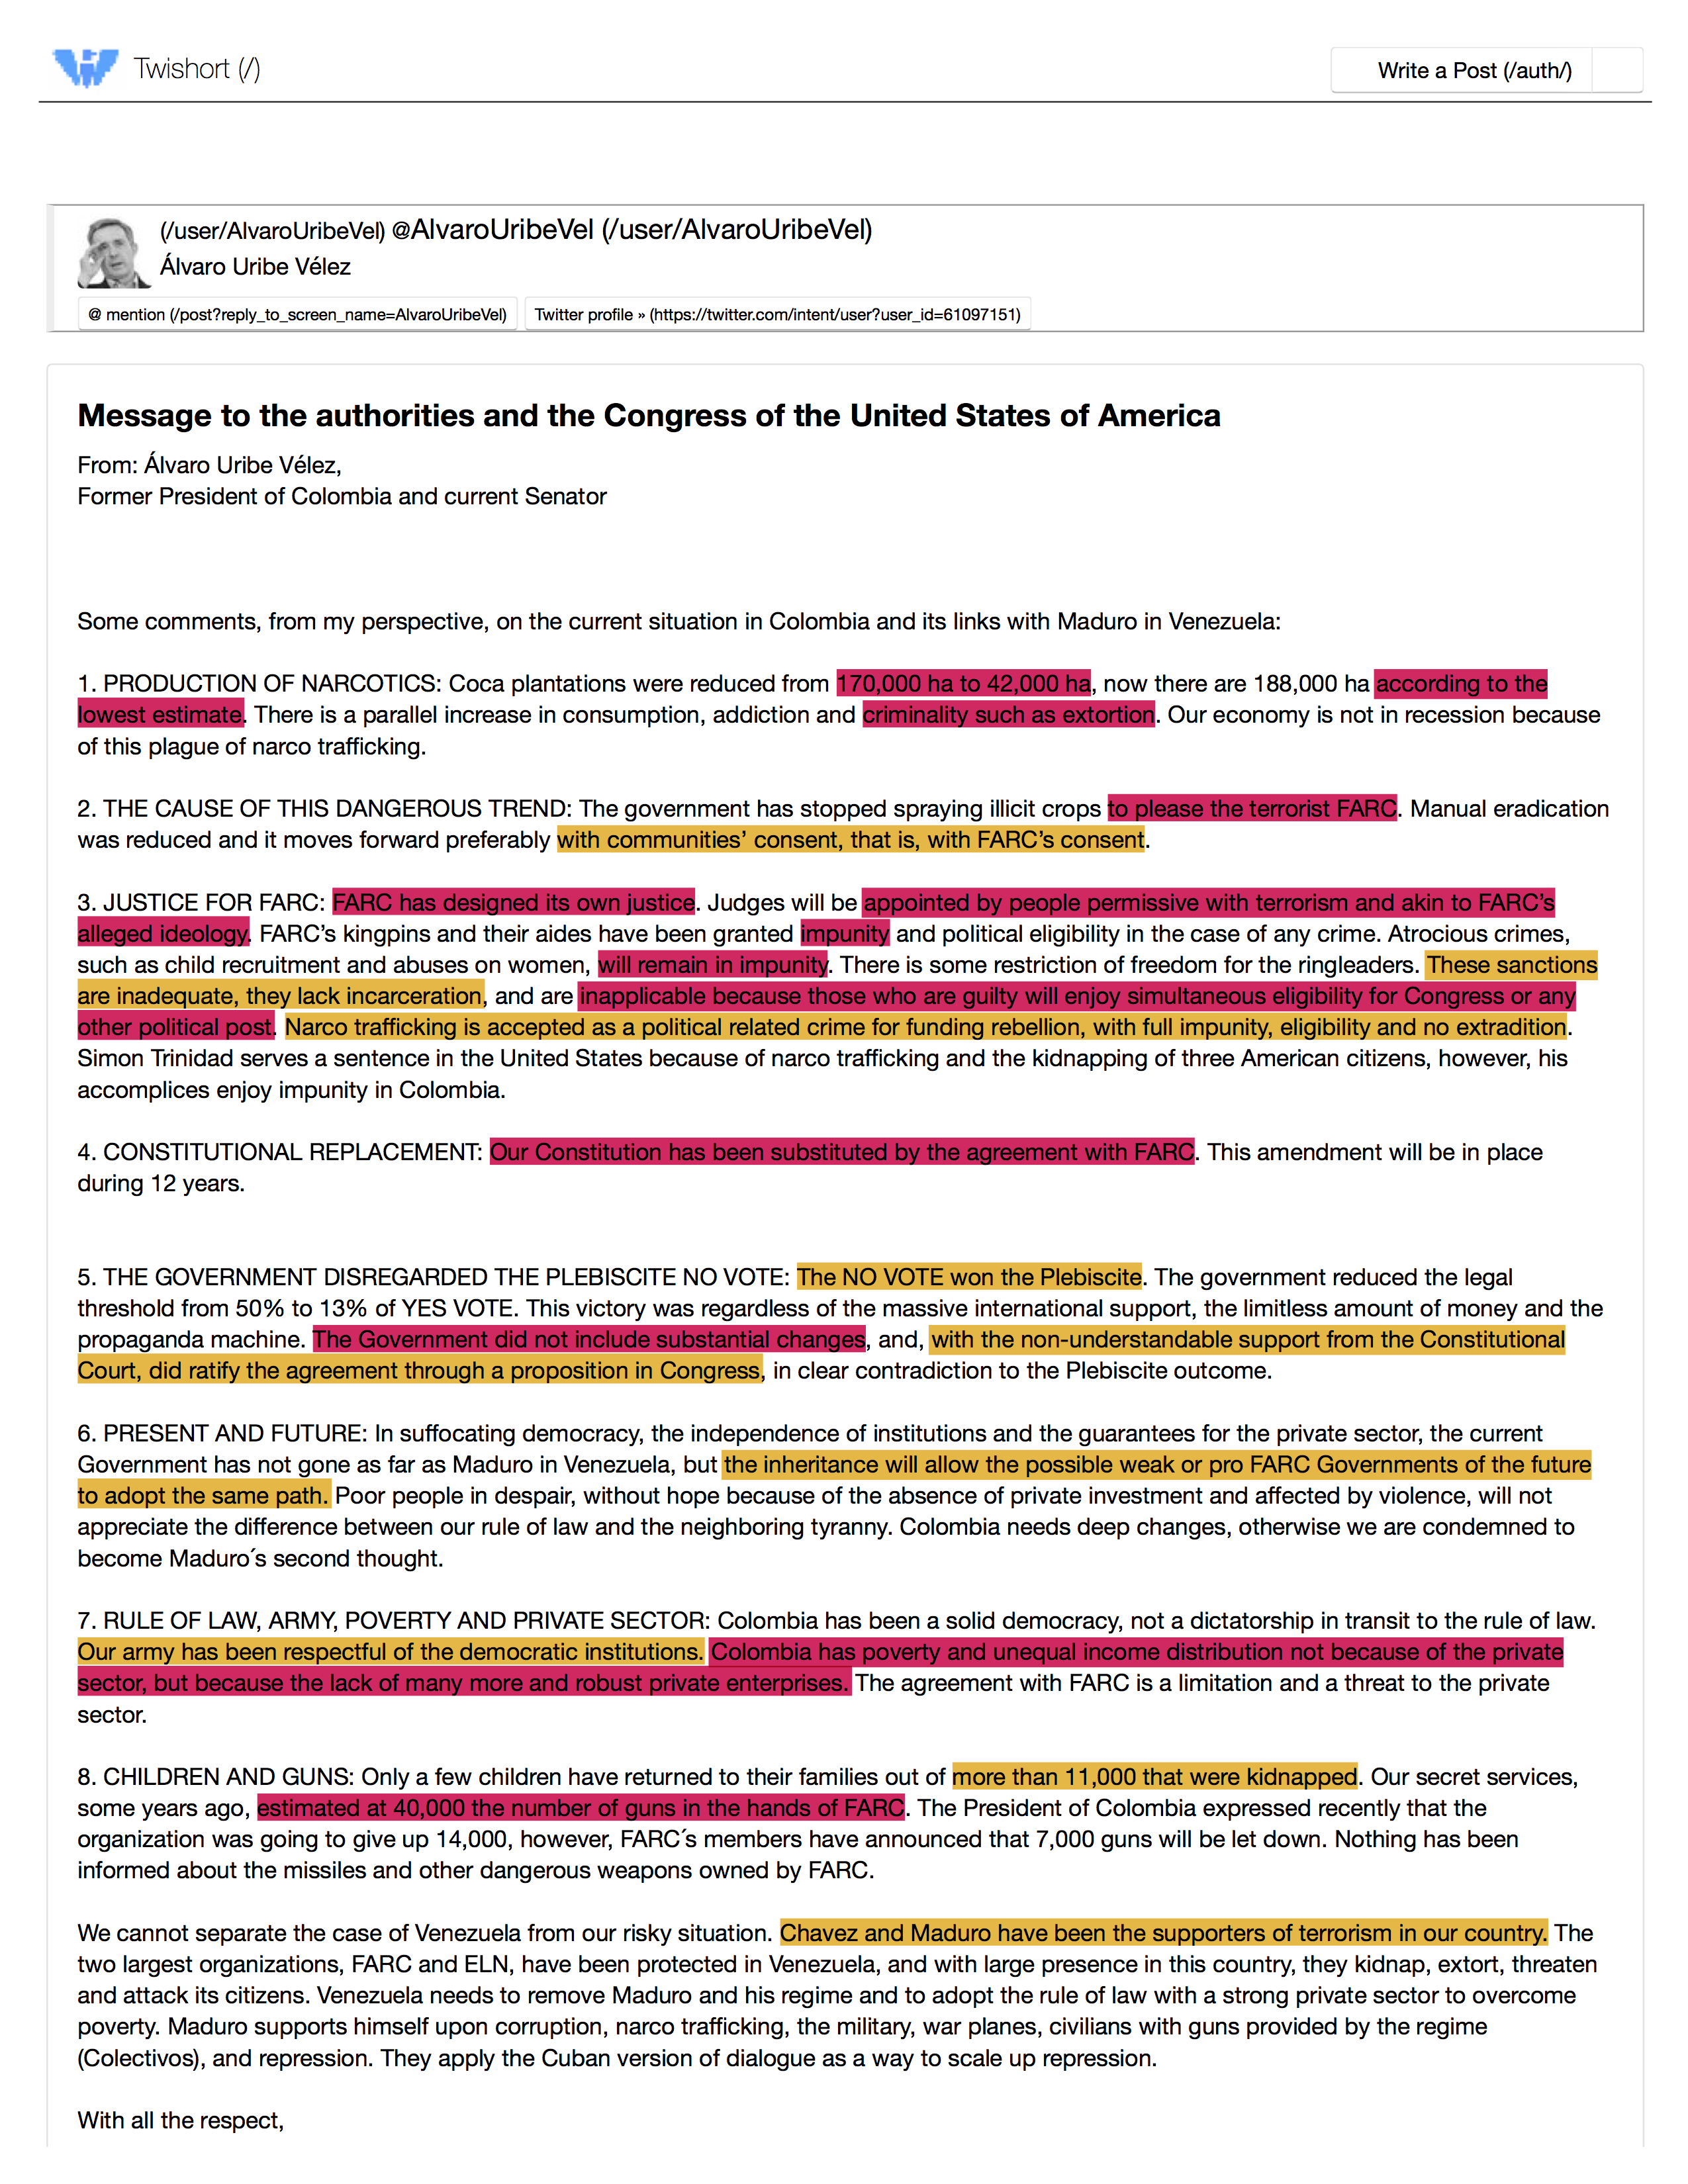 Uribe's statement, with incorrect statements highlighted in pink and debatable assertions highlighted in orange.